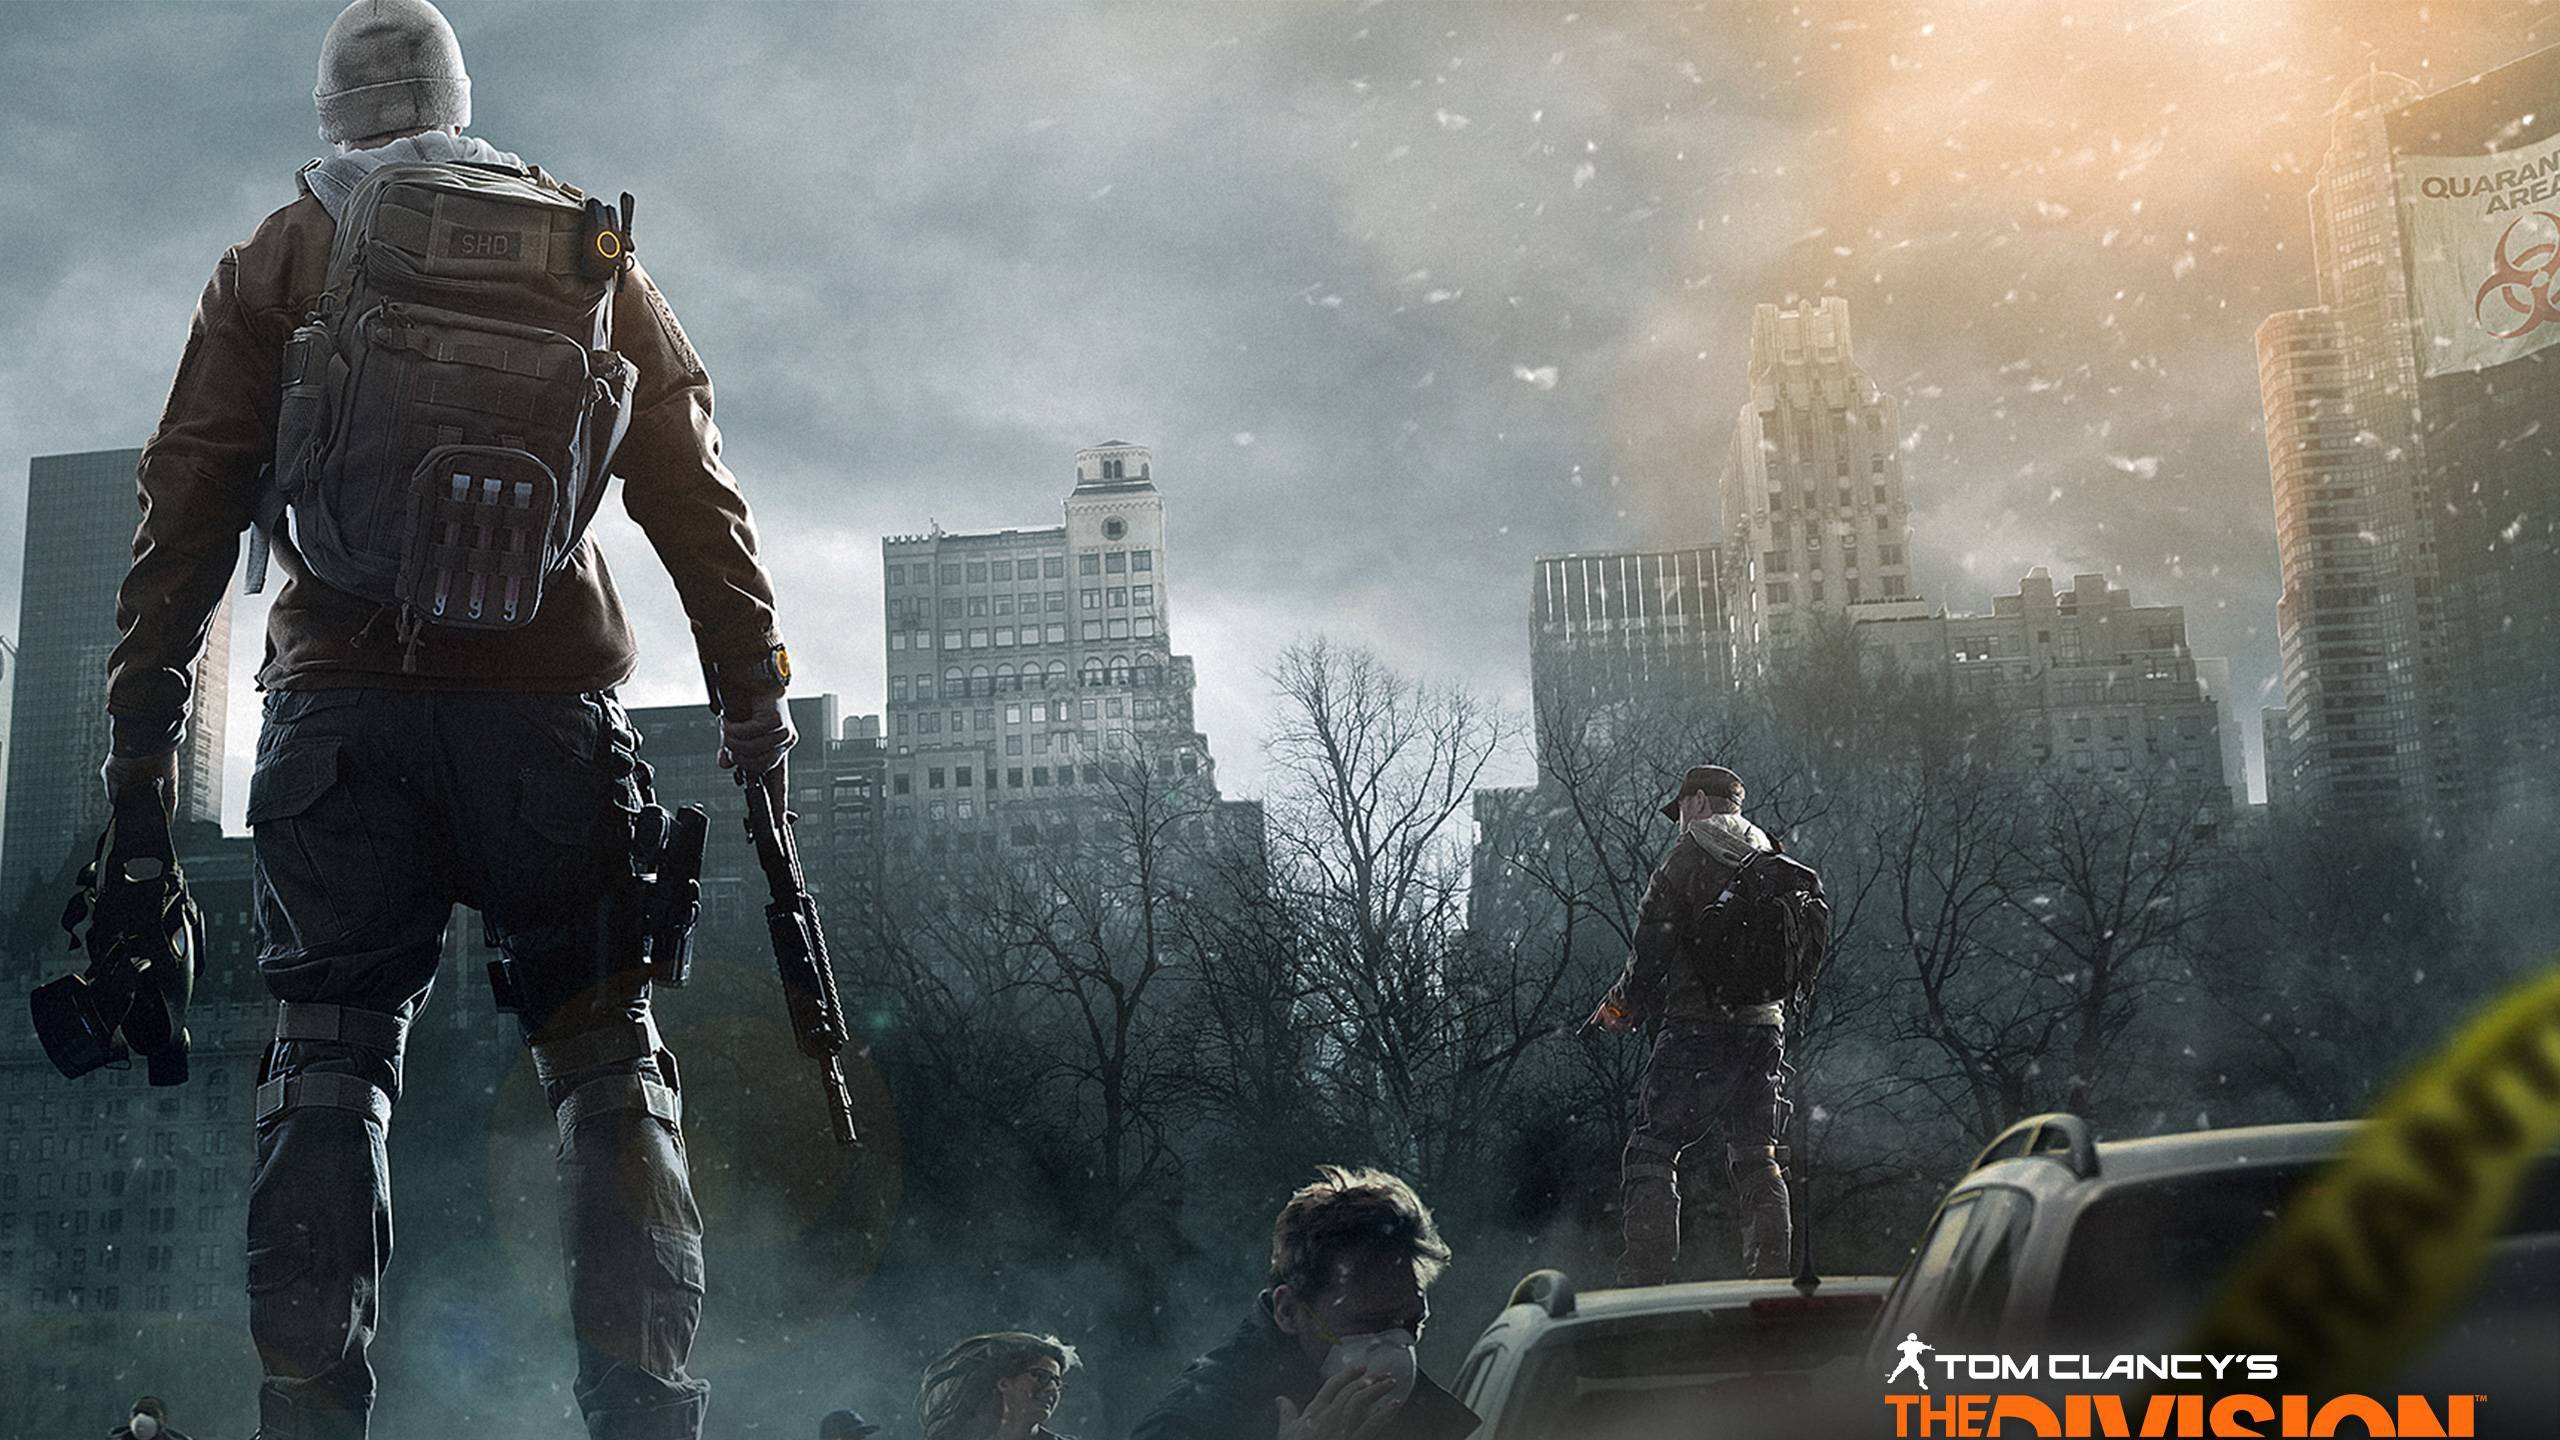 Tom Clancy The Division for 2560x1440 HDTV resolution